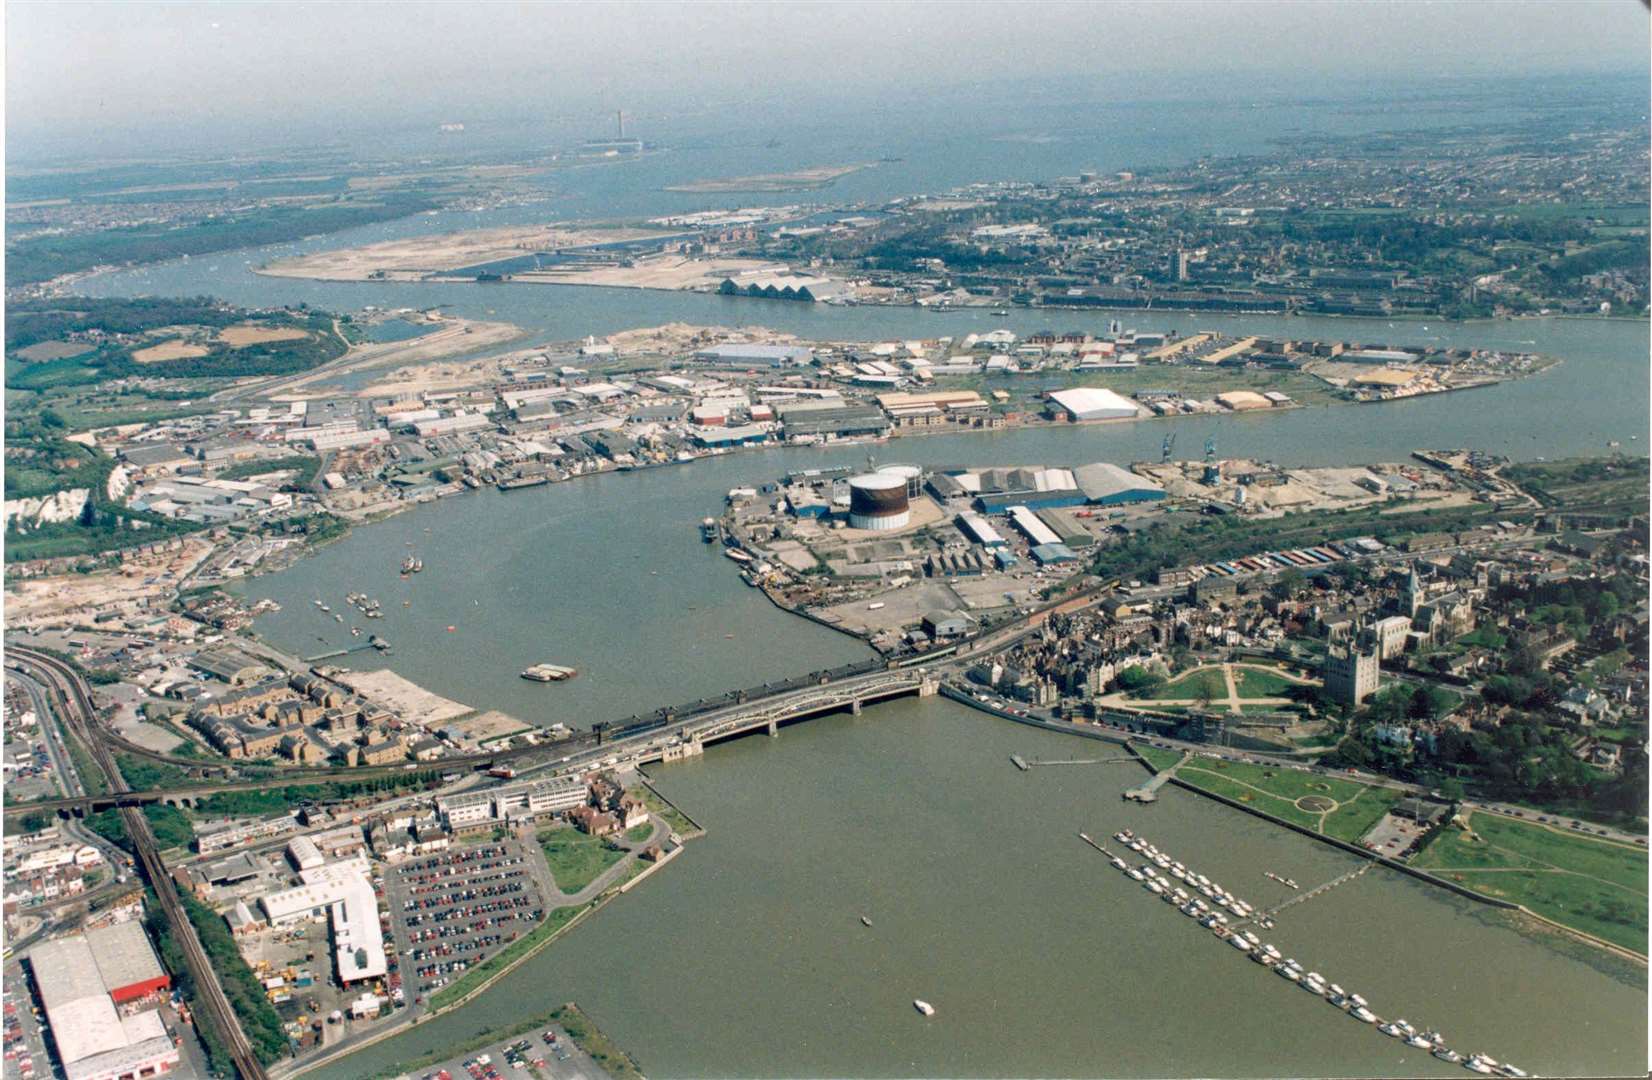 Rochester and the River Medway, 1997